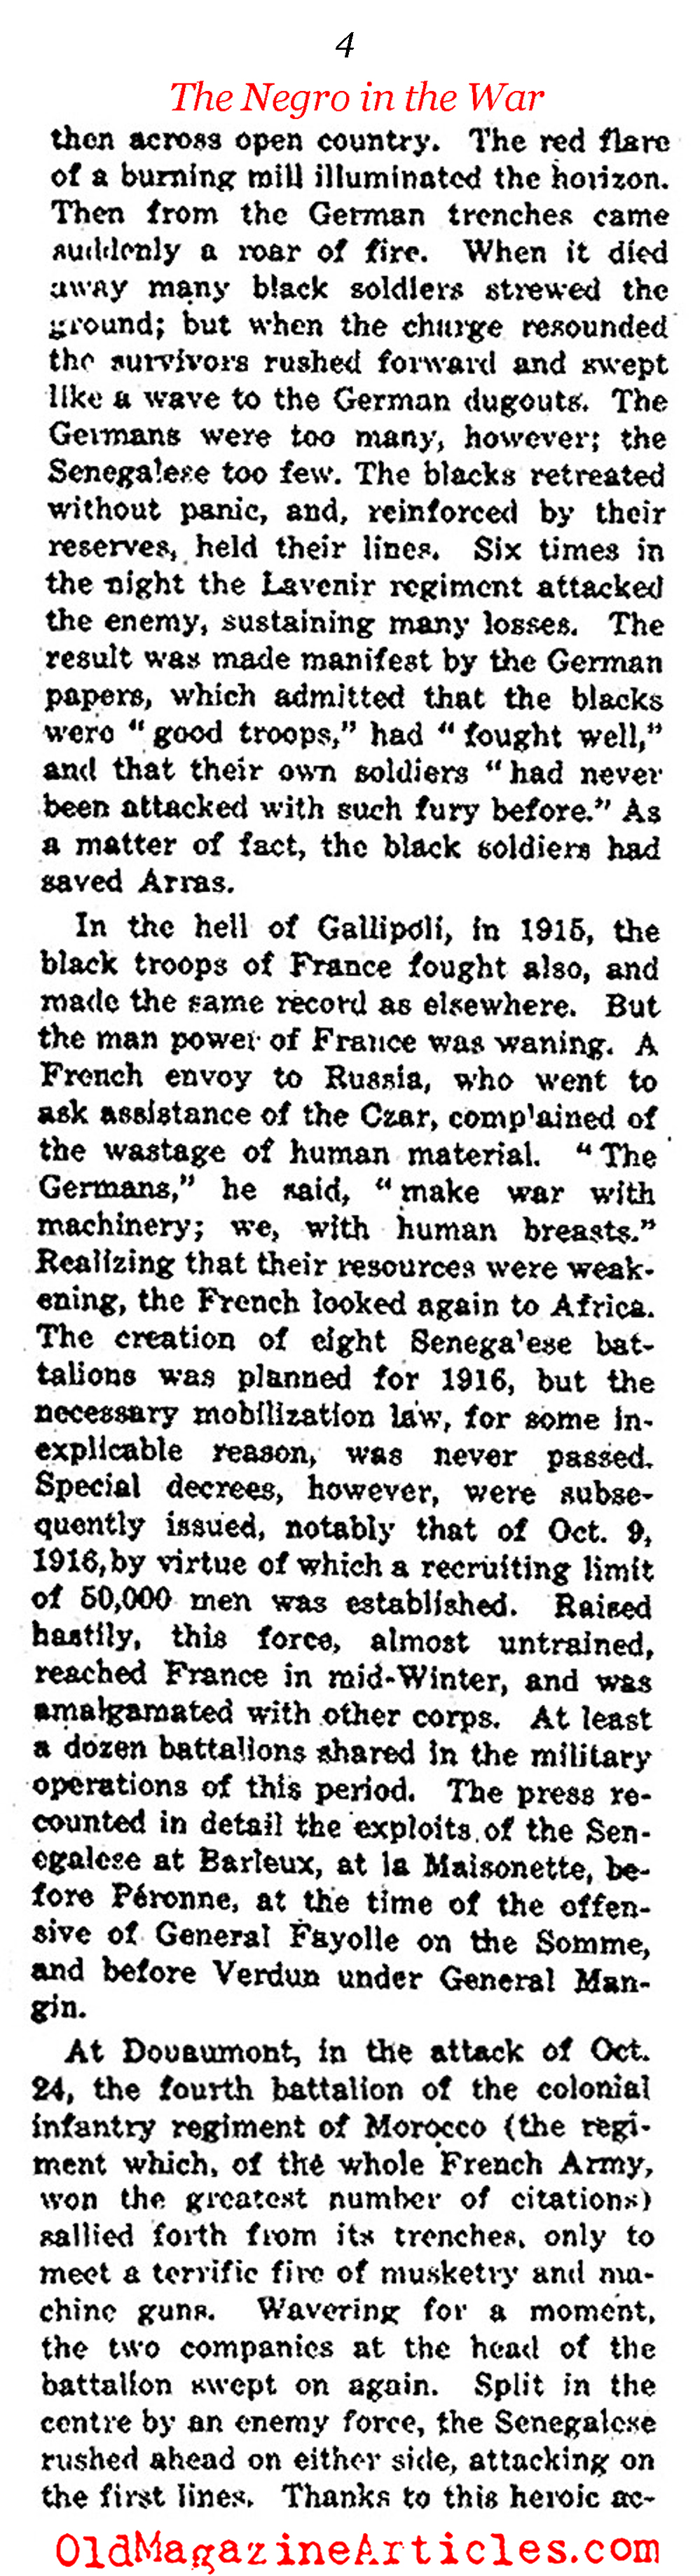 'The Negro in the War' (NY  Times, 1919)